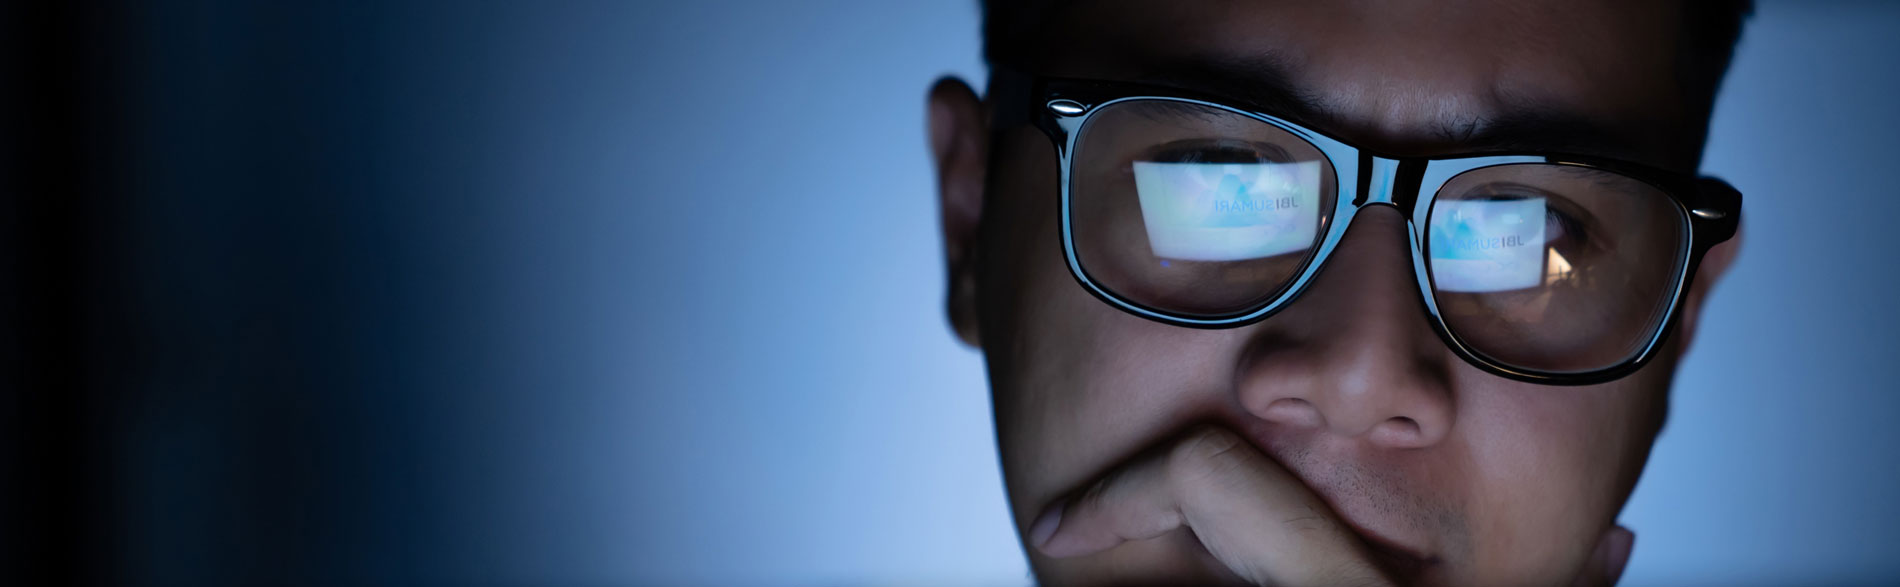 Man working on a laptop with screen reflected in his glasses